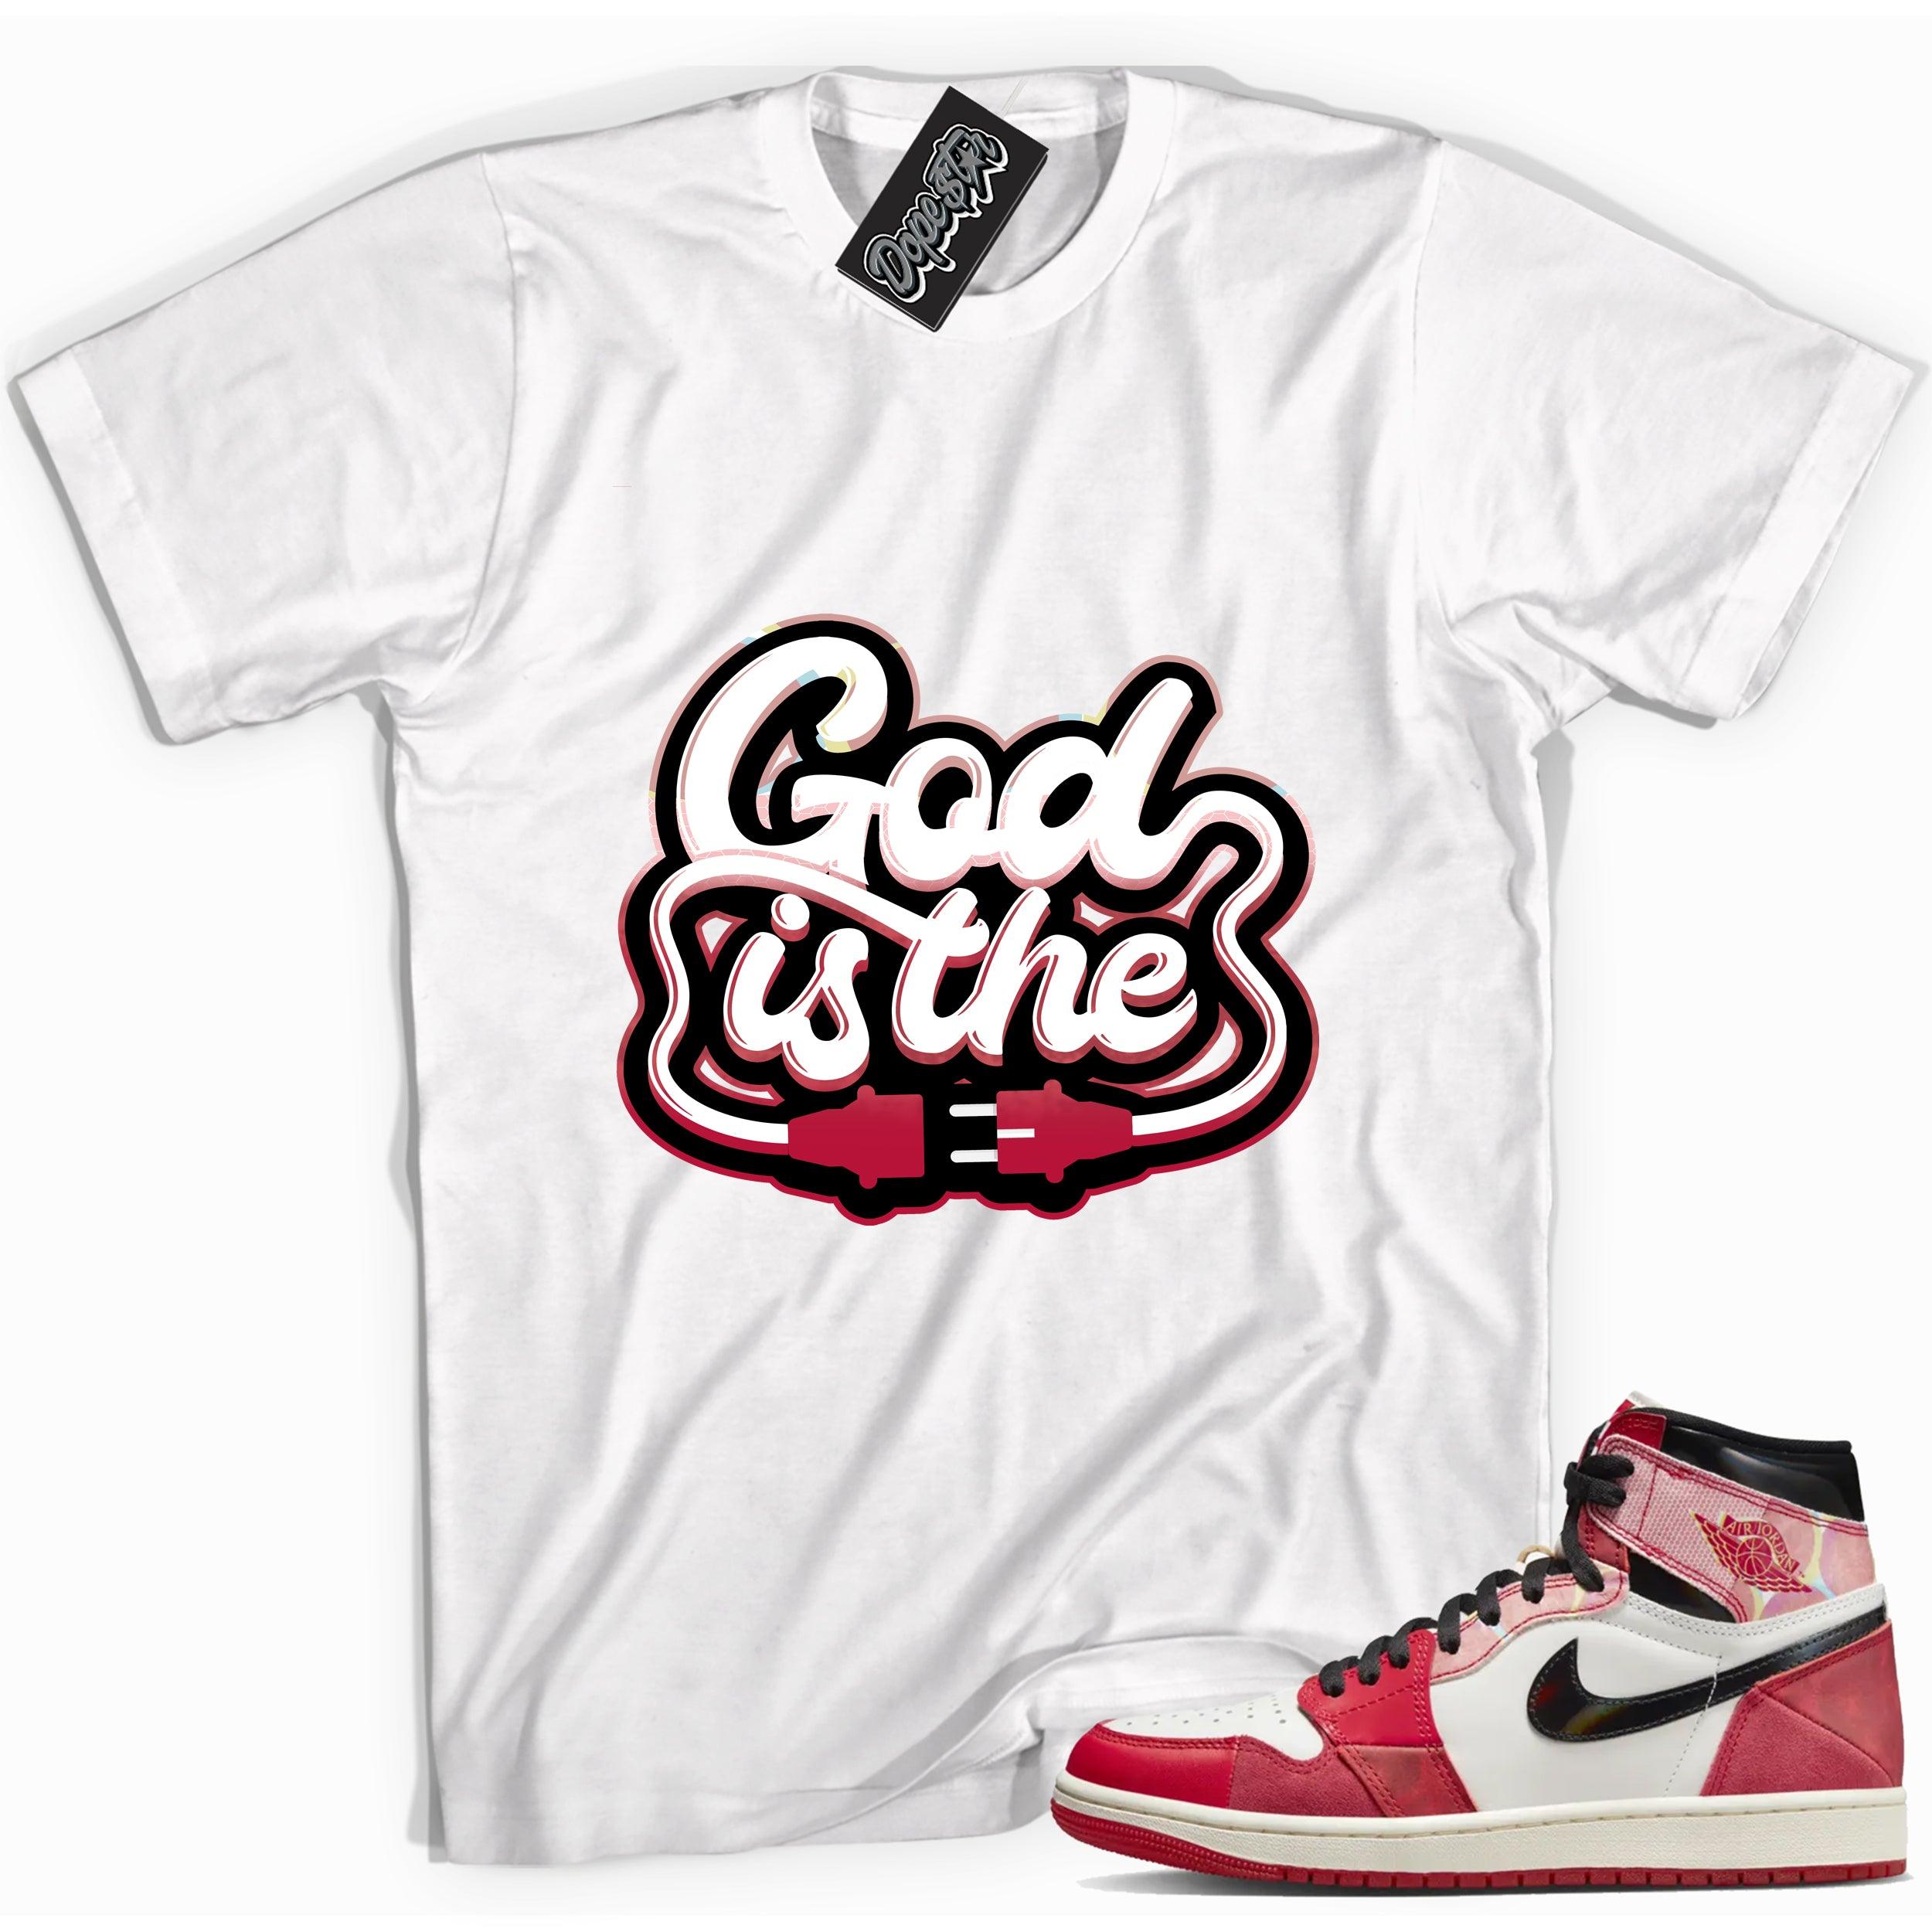 Cool White graphic tee with “ GOD IS THE ” print, that perfectly matches AIR JORDAN 1 Retro High OG NEXT CHAPTER SPIDER-VERSE sneakers 